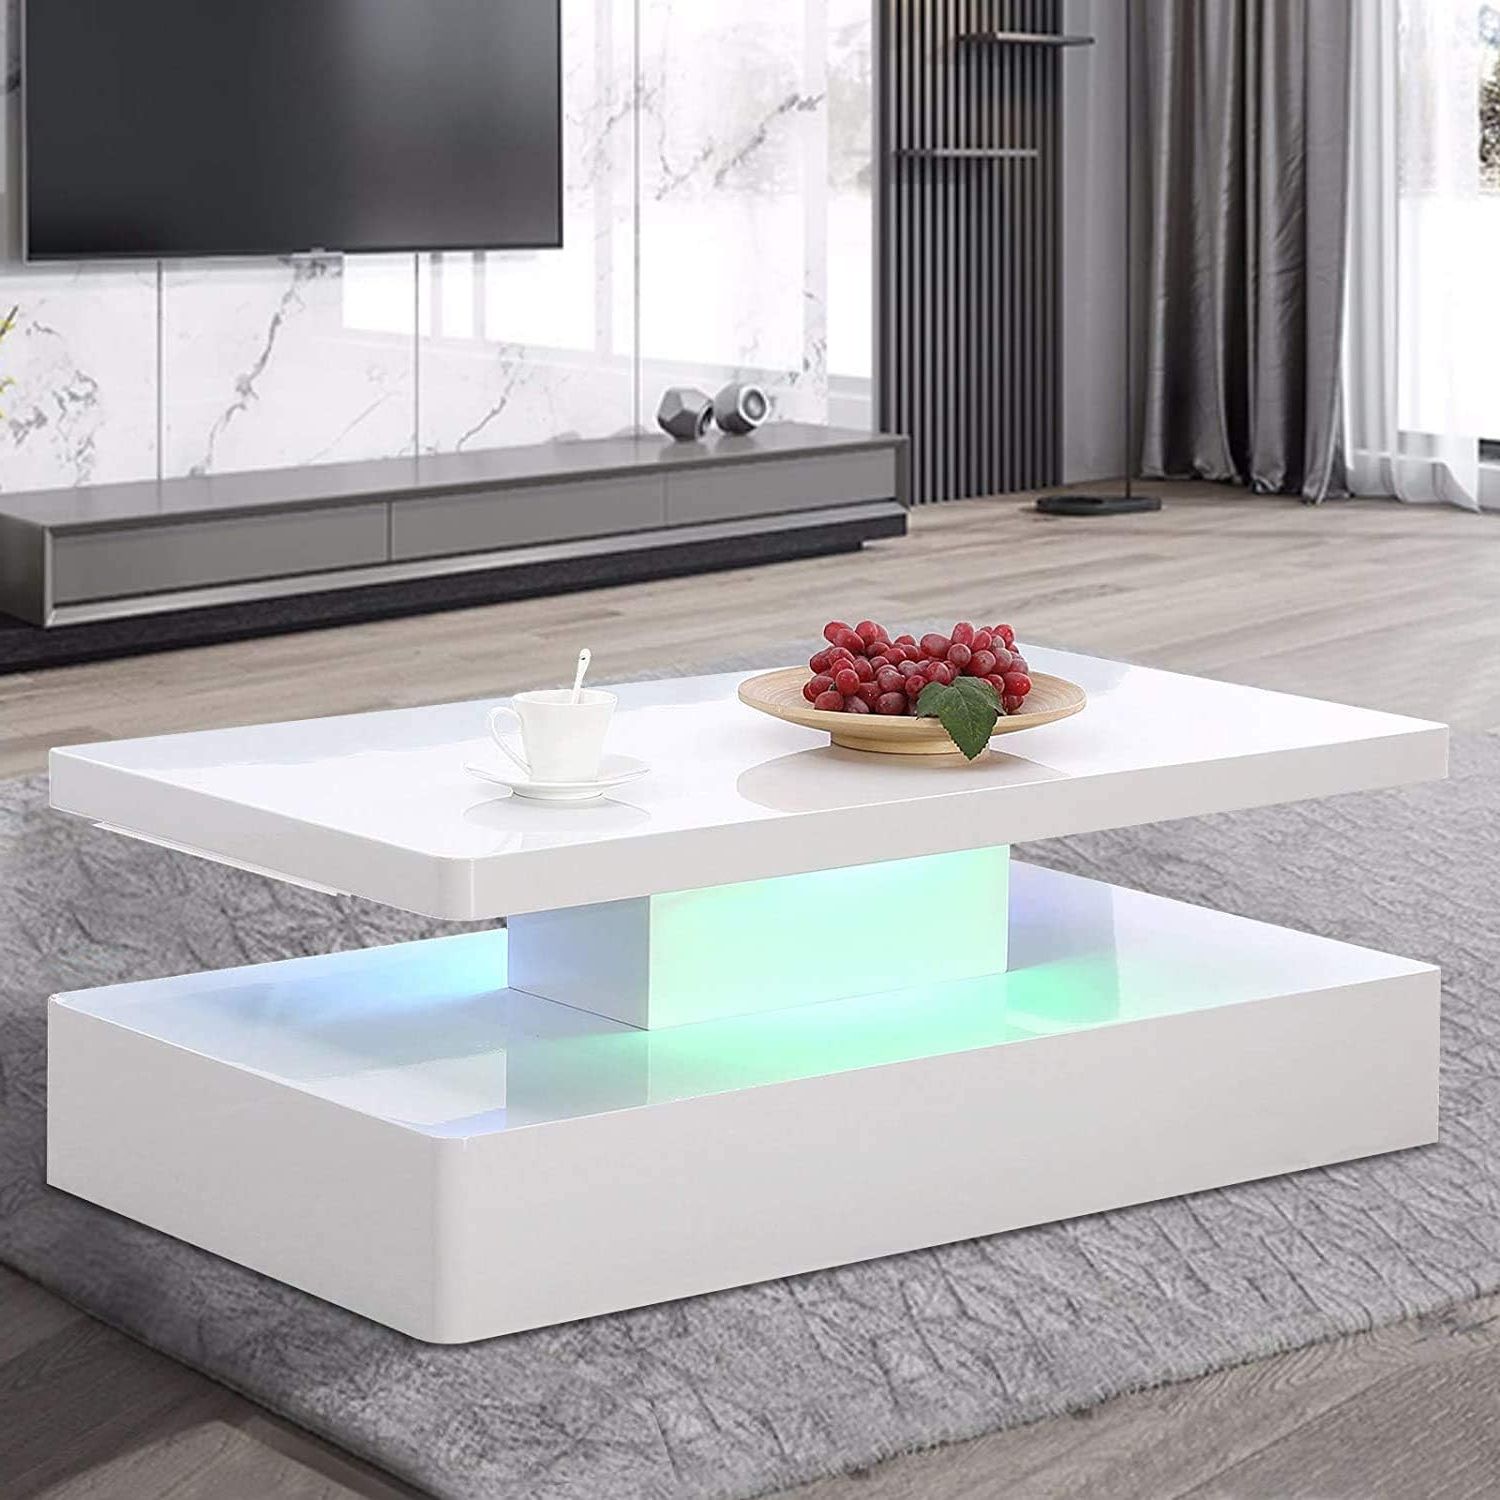 Coffee Tables With Drawers And Led Lights With Regard To Preferred Amazon: Mecor Modern Glossy White Coffee Table W/led Lighting,  (View 14 of 15)